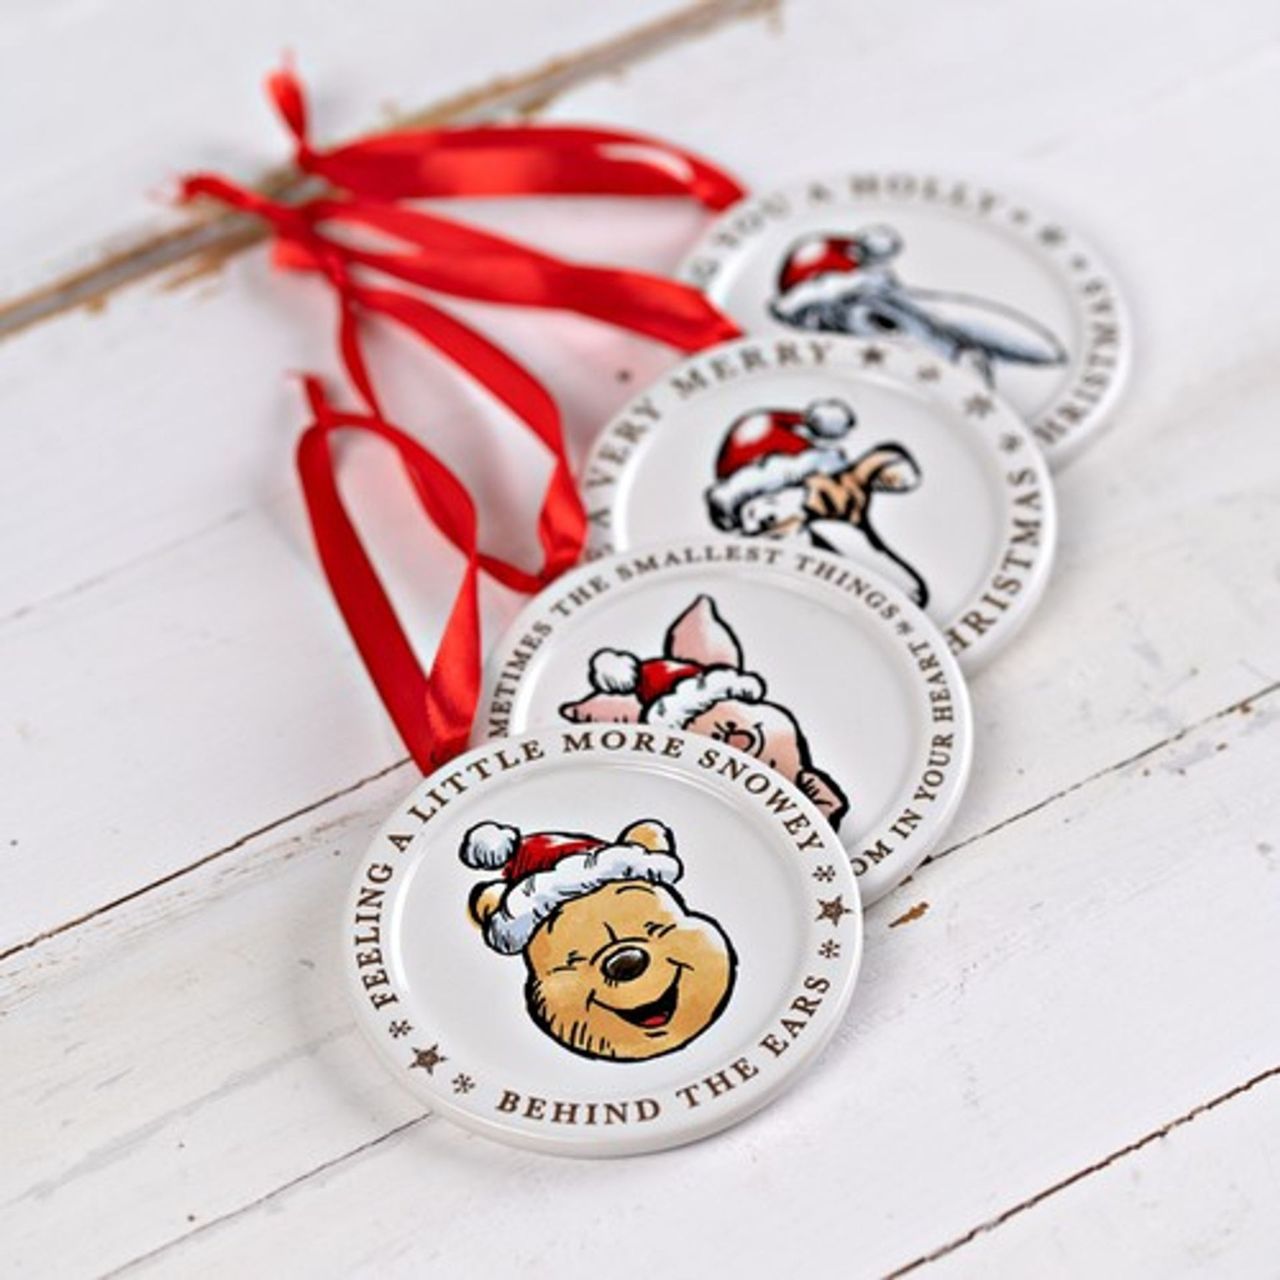 Disney Piglet Christmas Ceramic Decoration  This delightful Christmas decoration is sure to bring some joy to any Disney fan's tree this year. A perfect ornament for a family home, make little one's Christmas a little more special this year with Tigger.